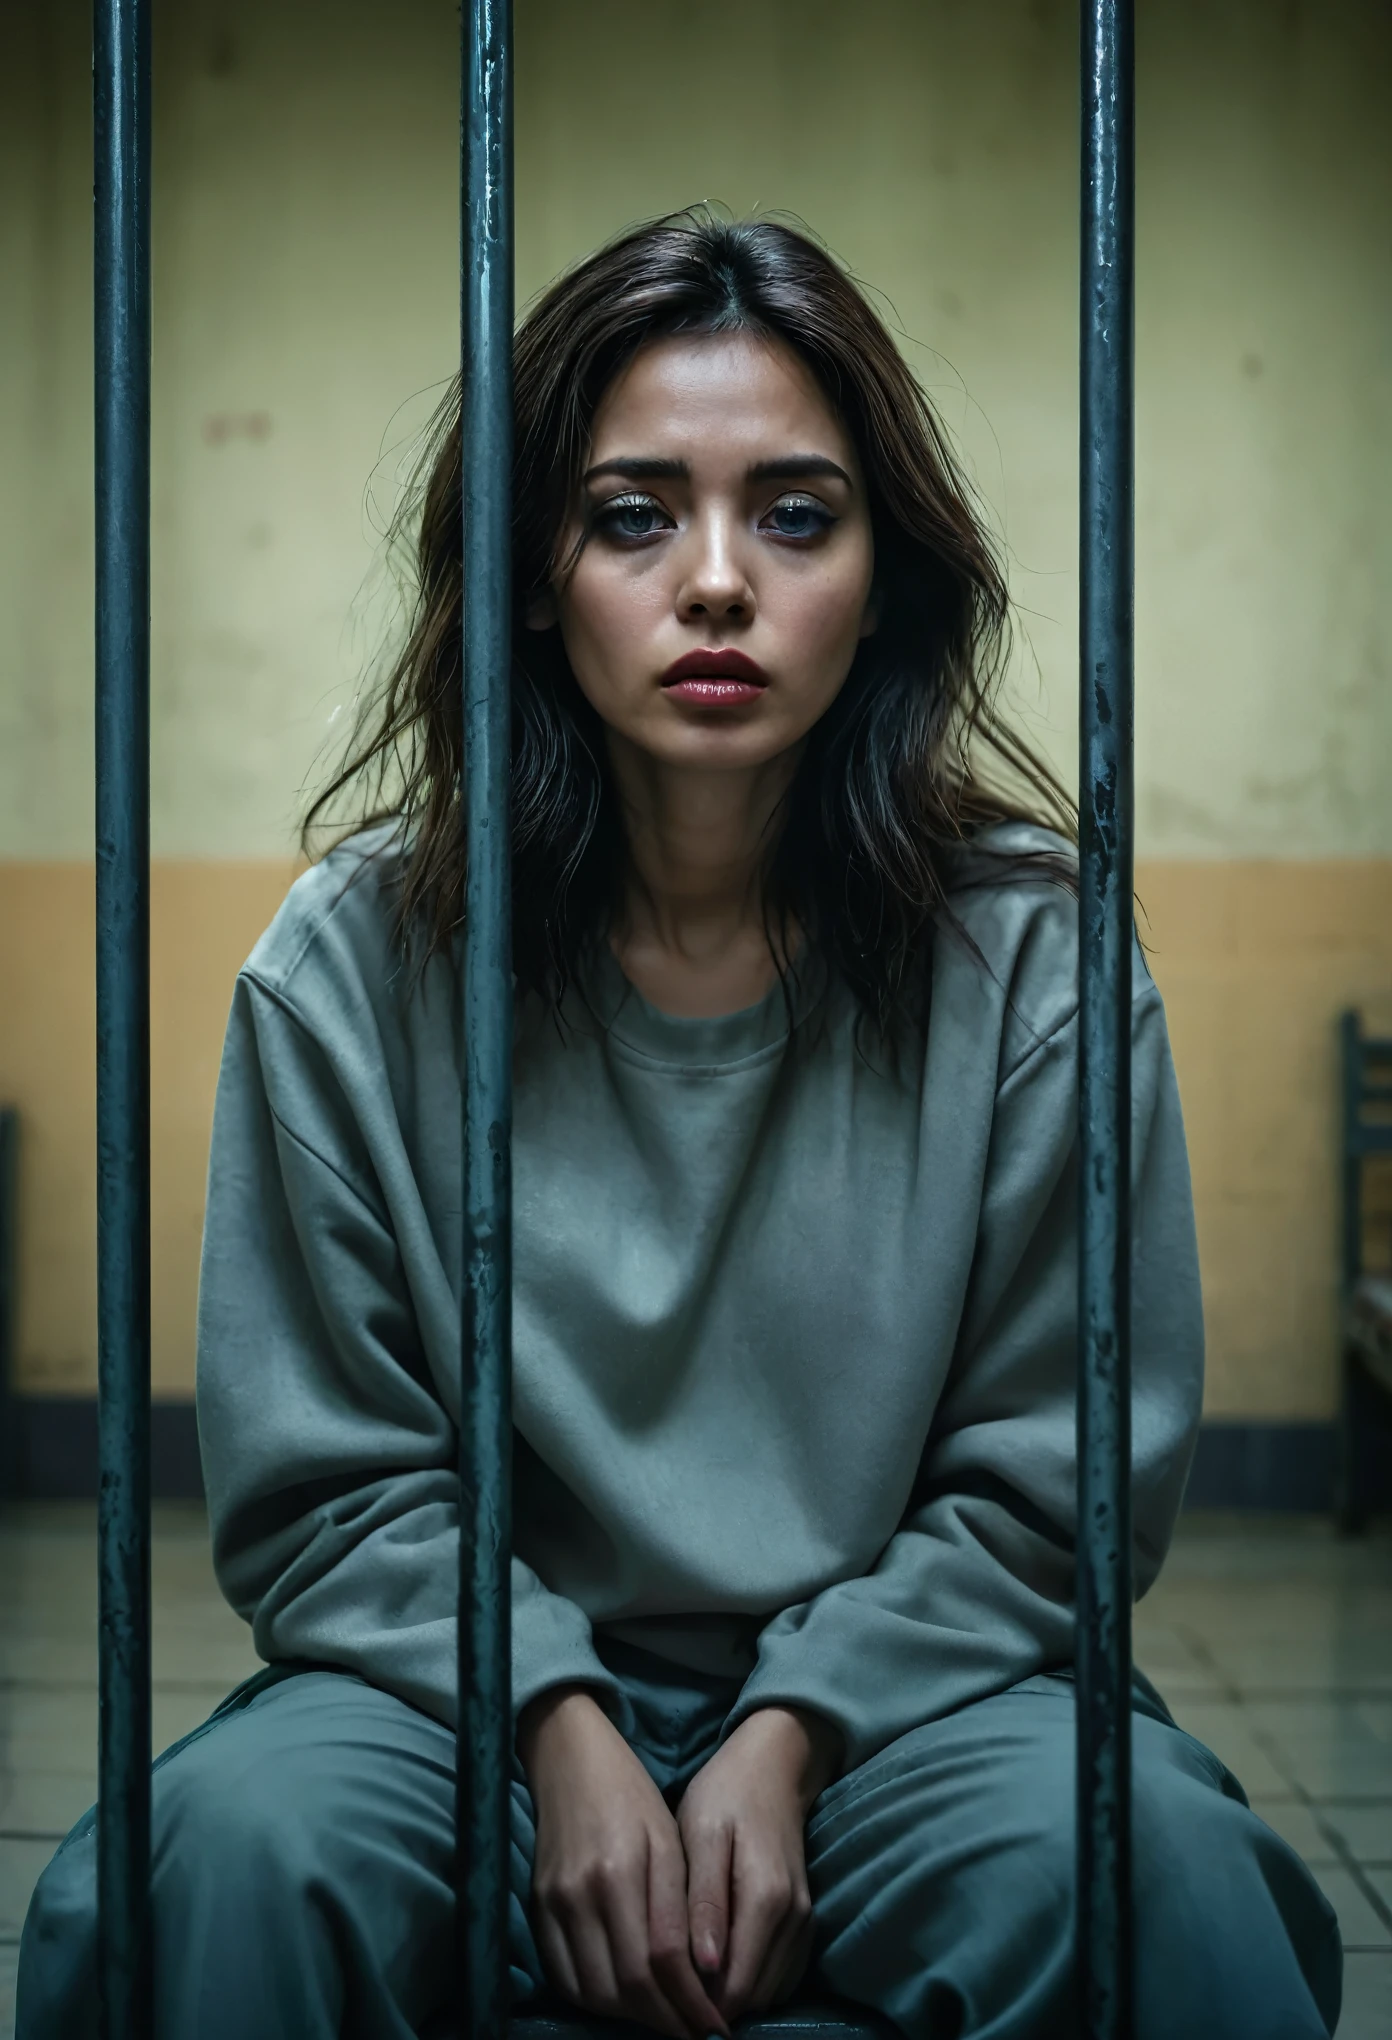 (best quality, highres, realistic:1.37), detailed eyes and face, beautiful lips, woman sitting in a detention center with iron bars, full body wide shot, gloomy atmosphere, melancholy expression, dim lighting, cold colors, despair, isolation, desolation,photo r3al